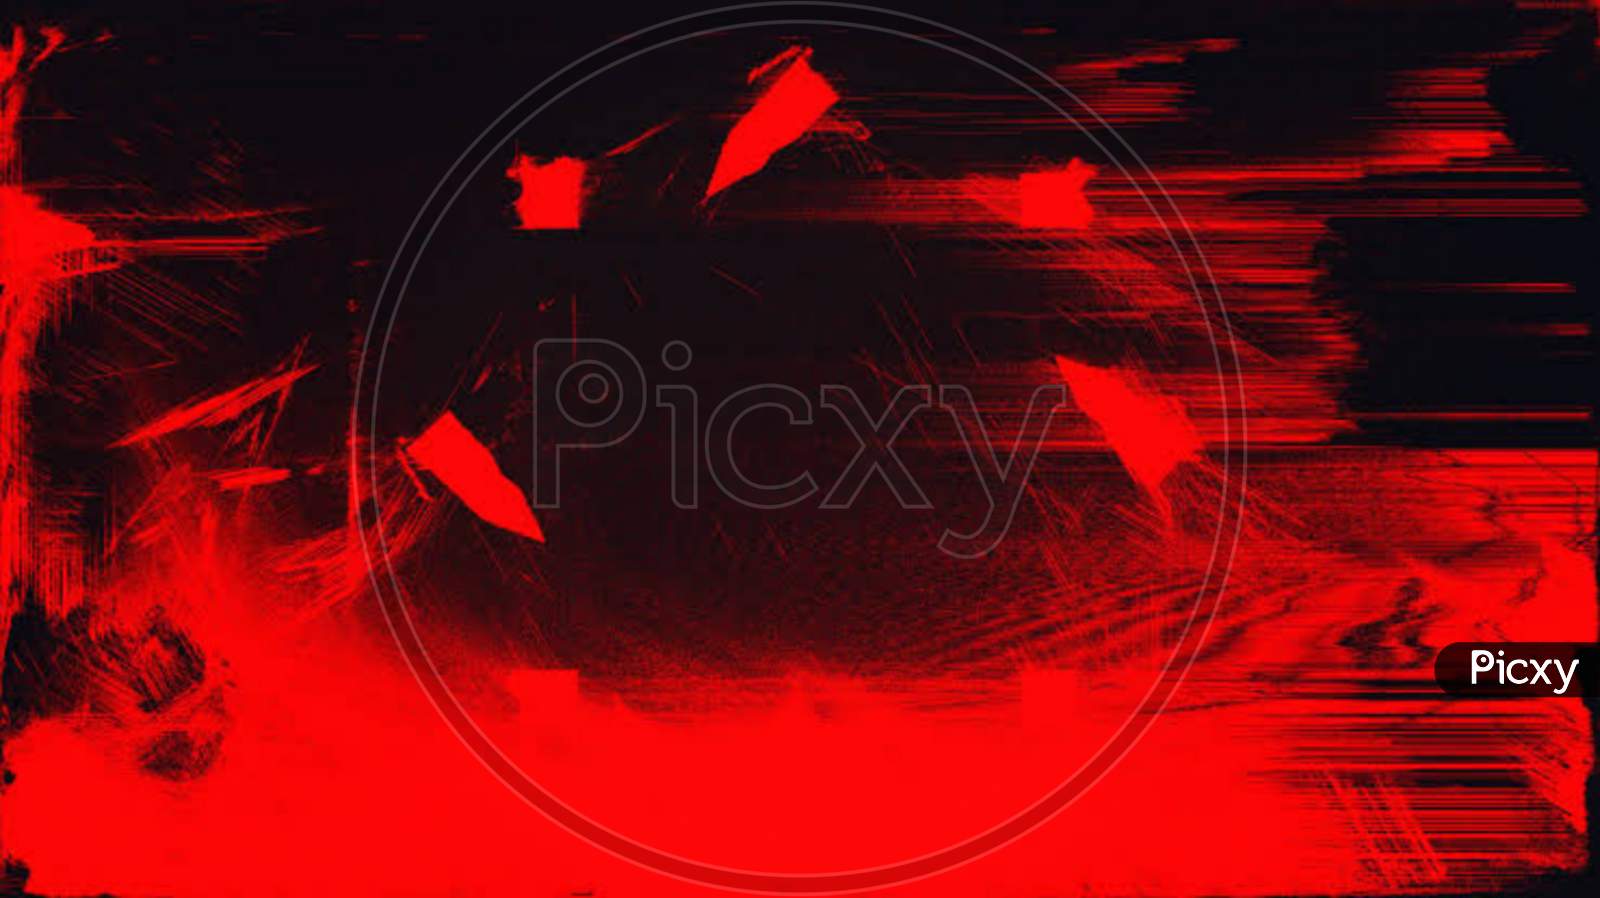 Red and black abstract images hd